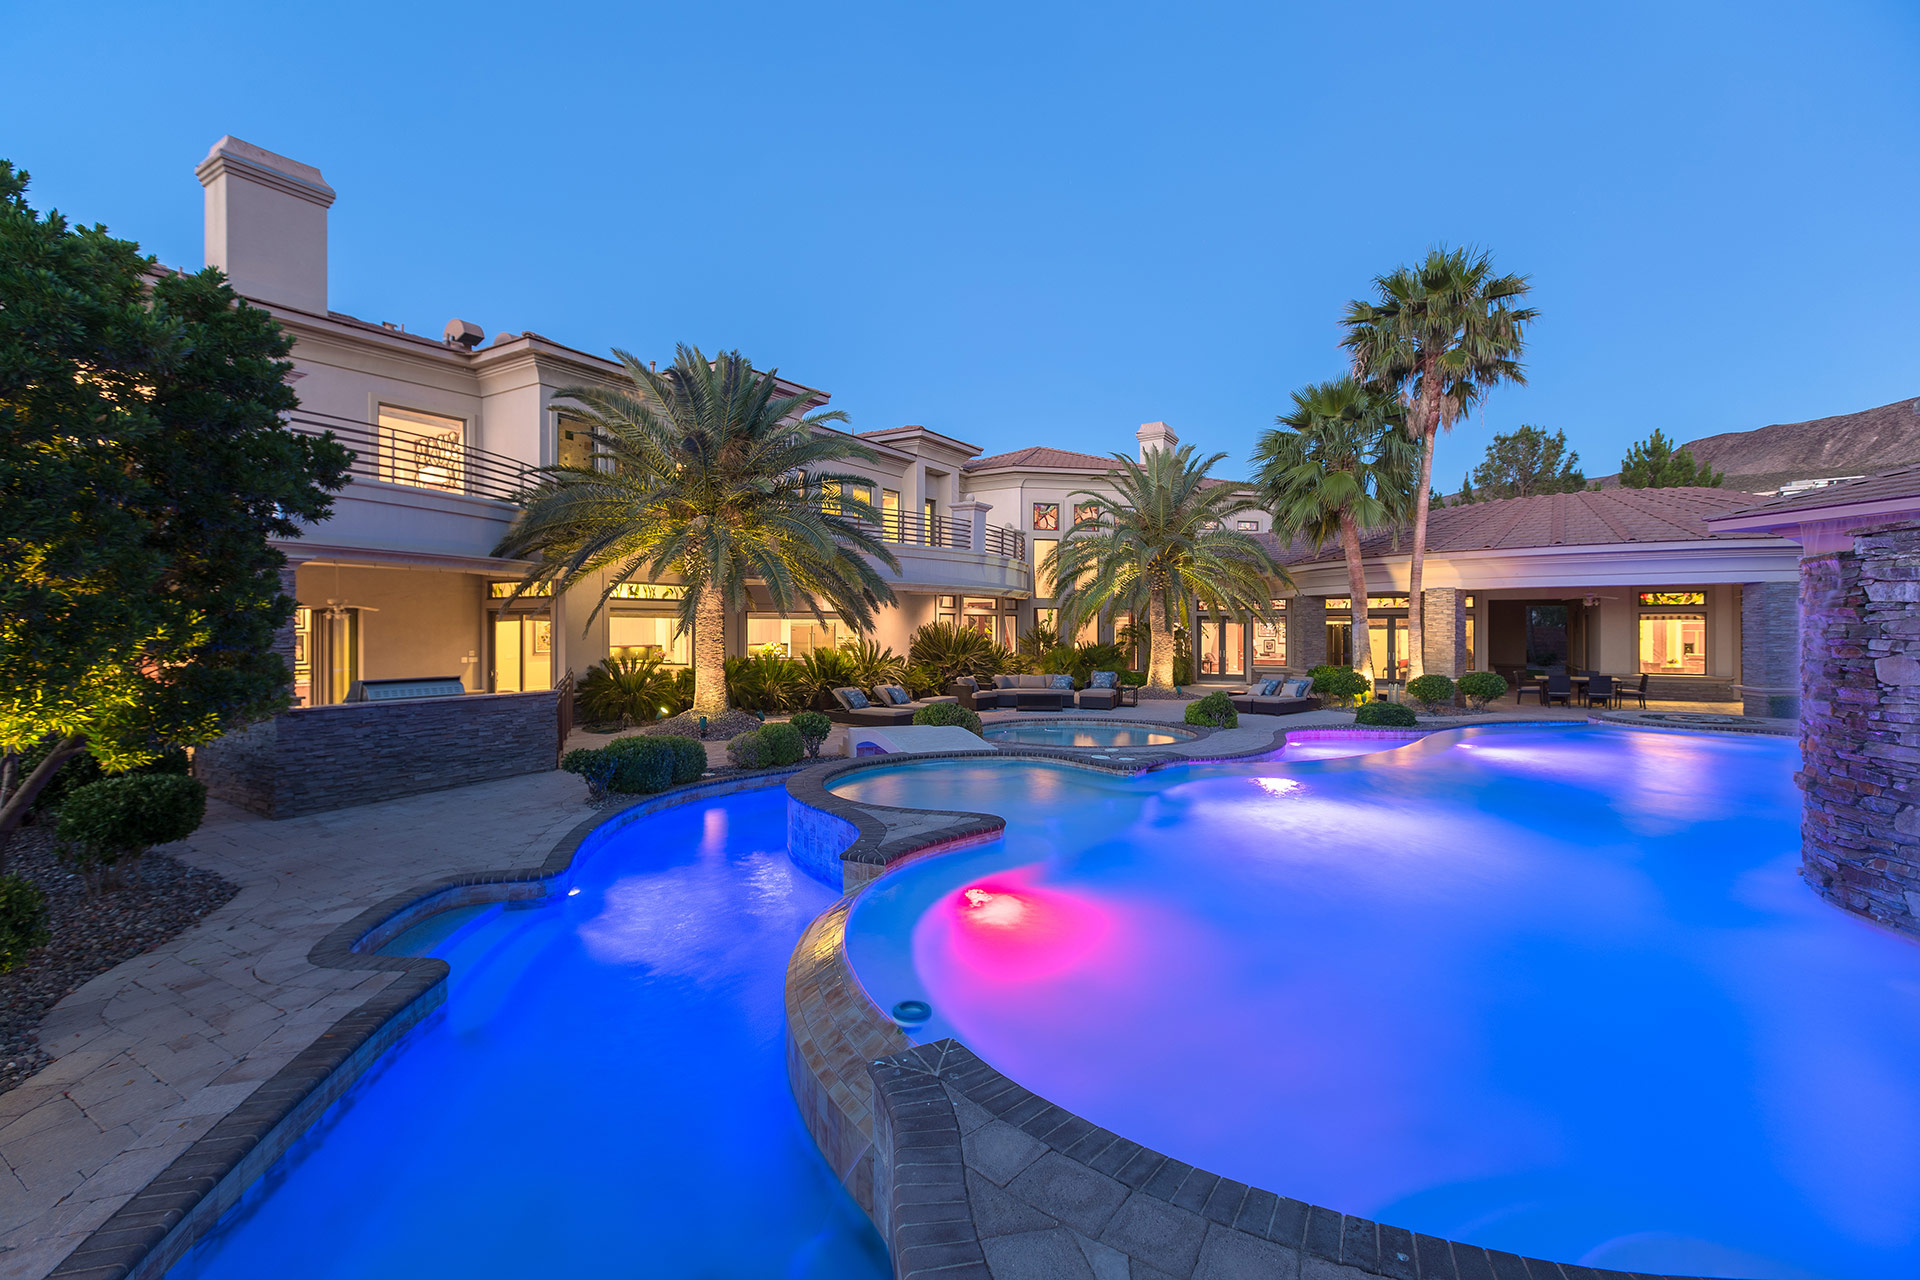 A luxury home backyard at twilight with swimming pool and lazy river in the foreground and palm trees, patio furniture and large home in the background.